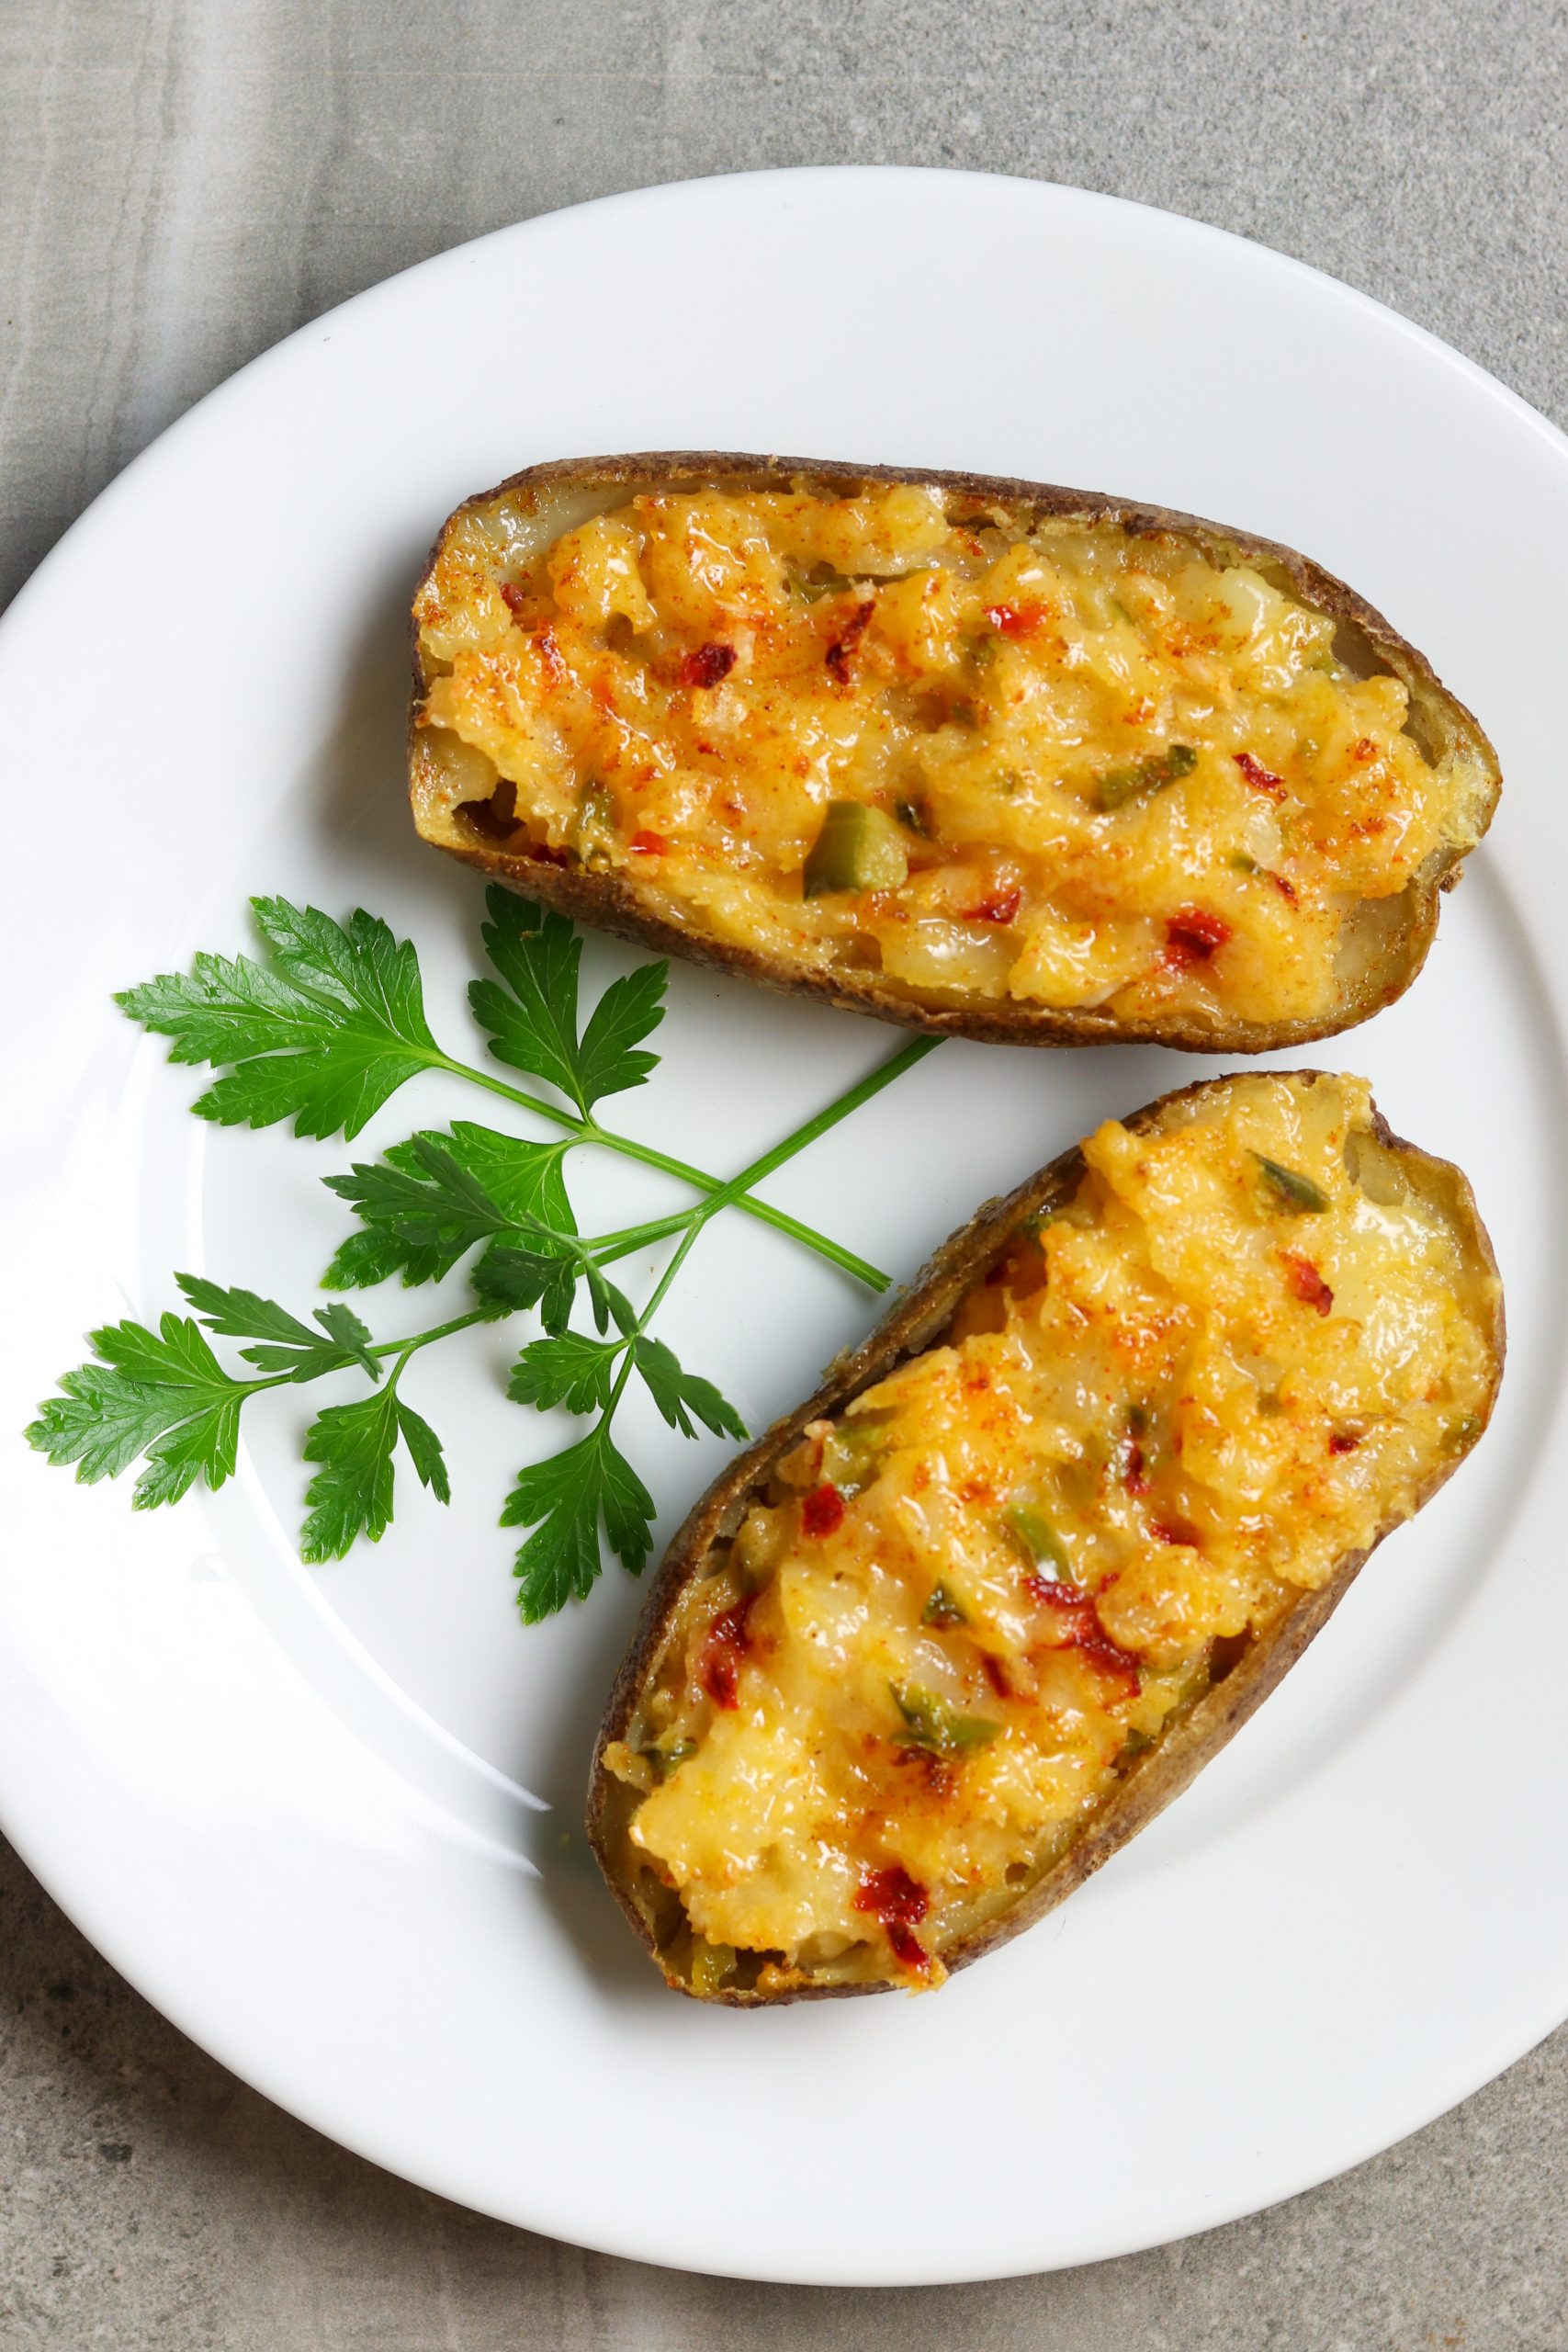 Two Twice-Baked Cheese Potato halves on a plate with parsley for garnish.